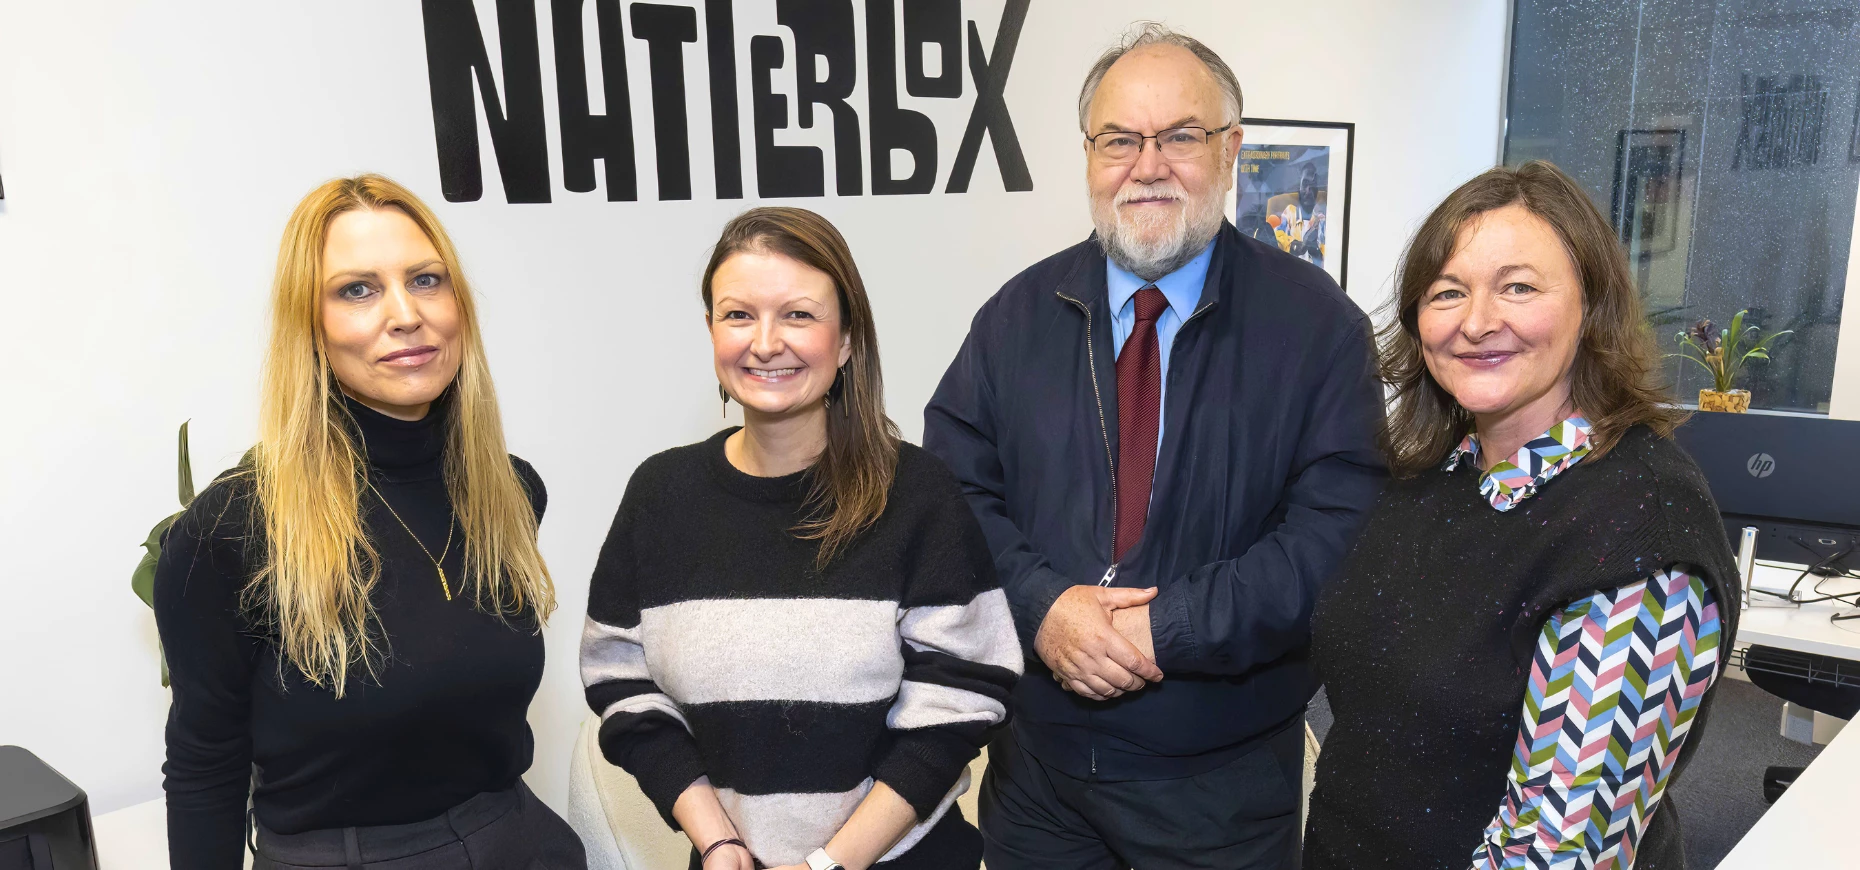 Ali Quirk, Founder of Chatterbox; Jen Hartley, Director of Invest Newcastle, NewcastleGateshead Initiative; Cllr Malcolm Brain, Gateshead Council; Lisa Laws Head of Talent and Business Development, North East Screen.